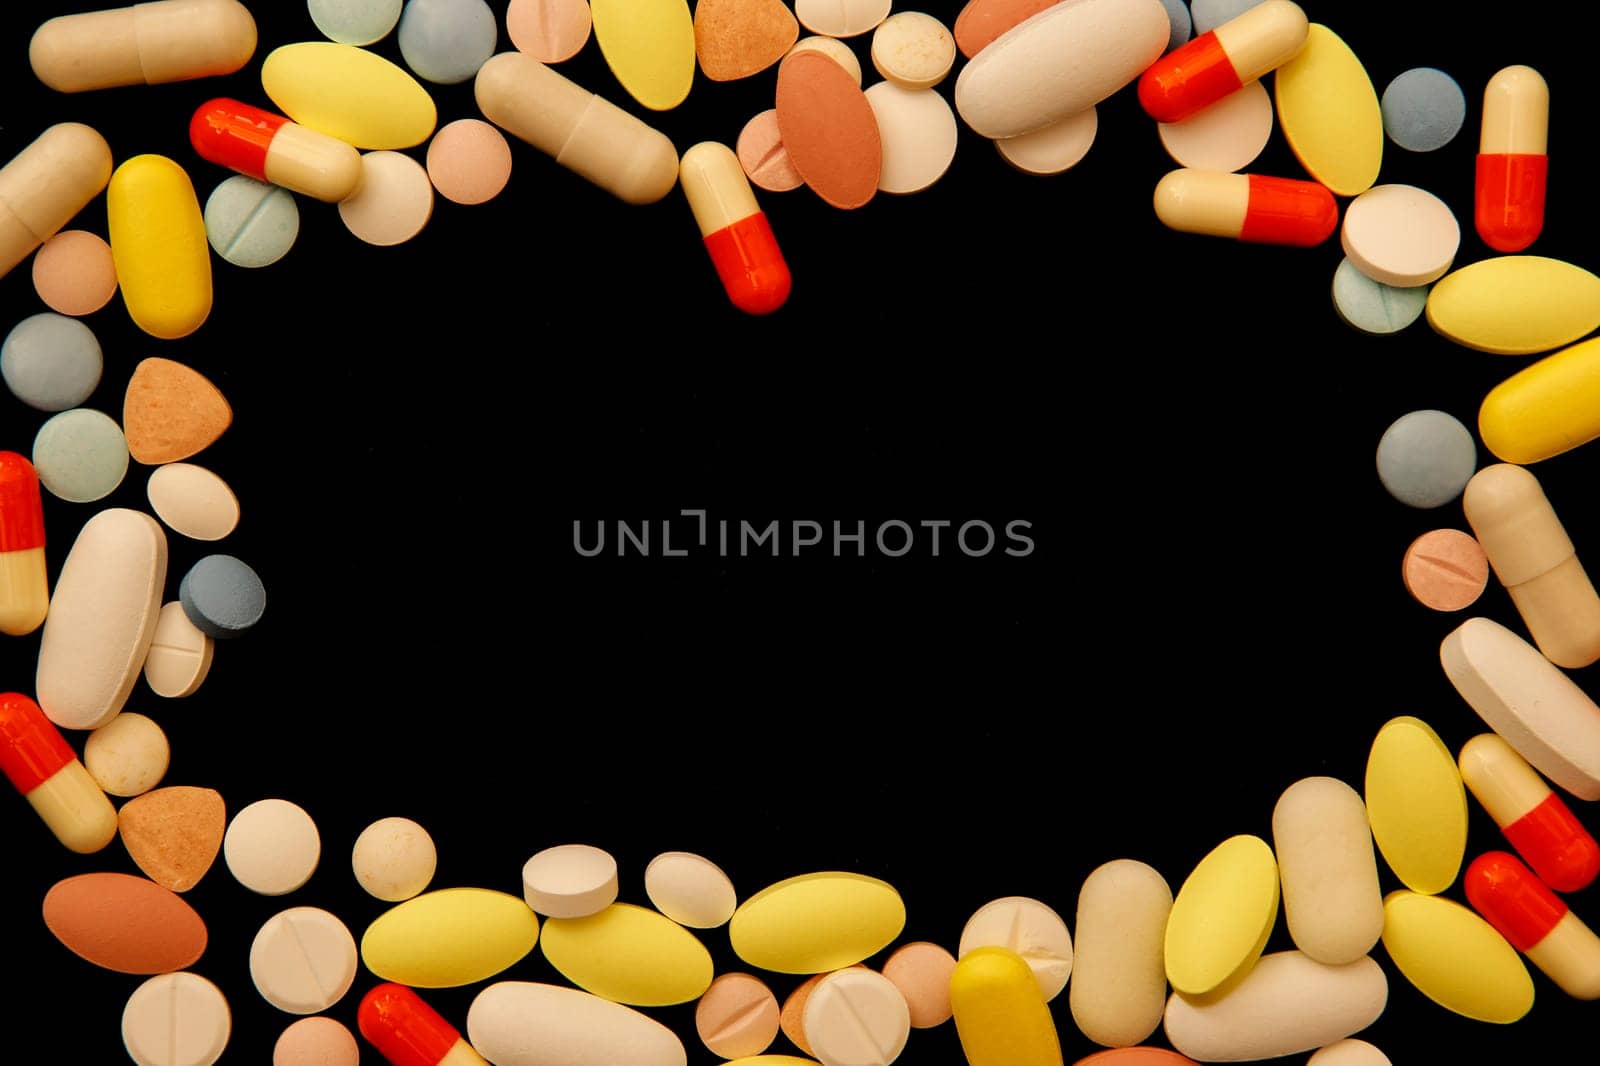 Many different colored drugs and pills around empty space by EdVal